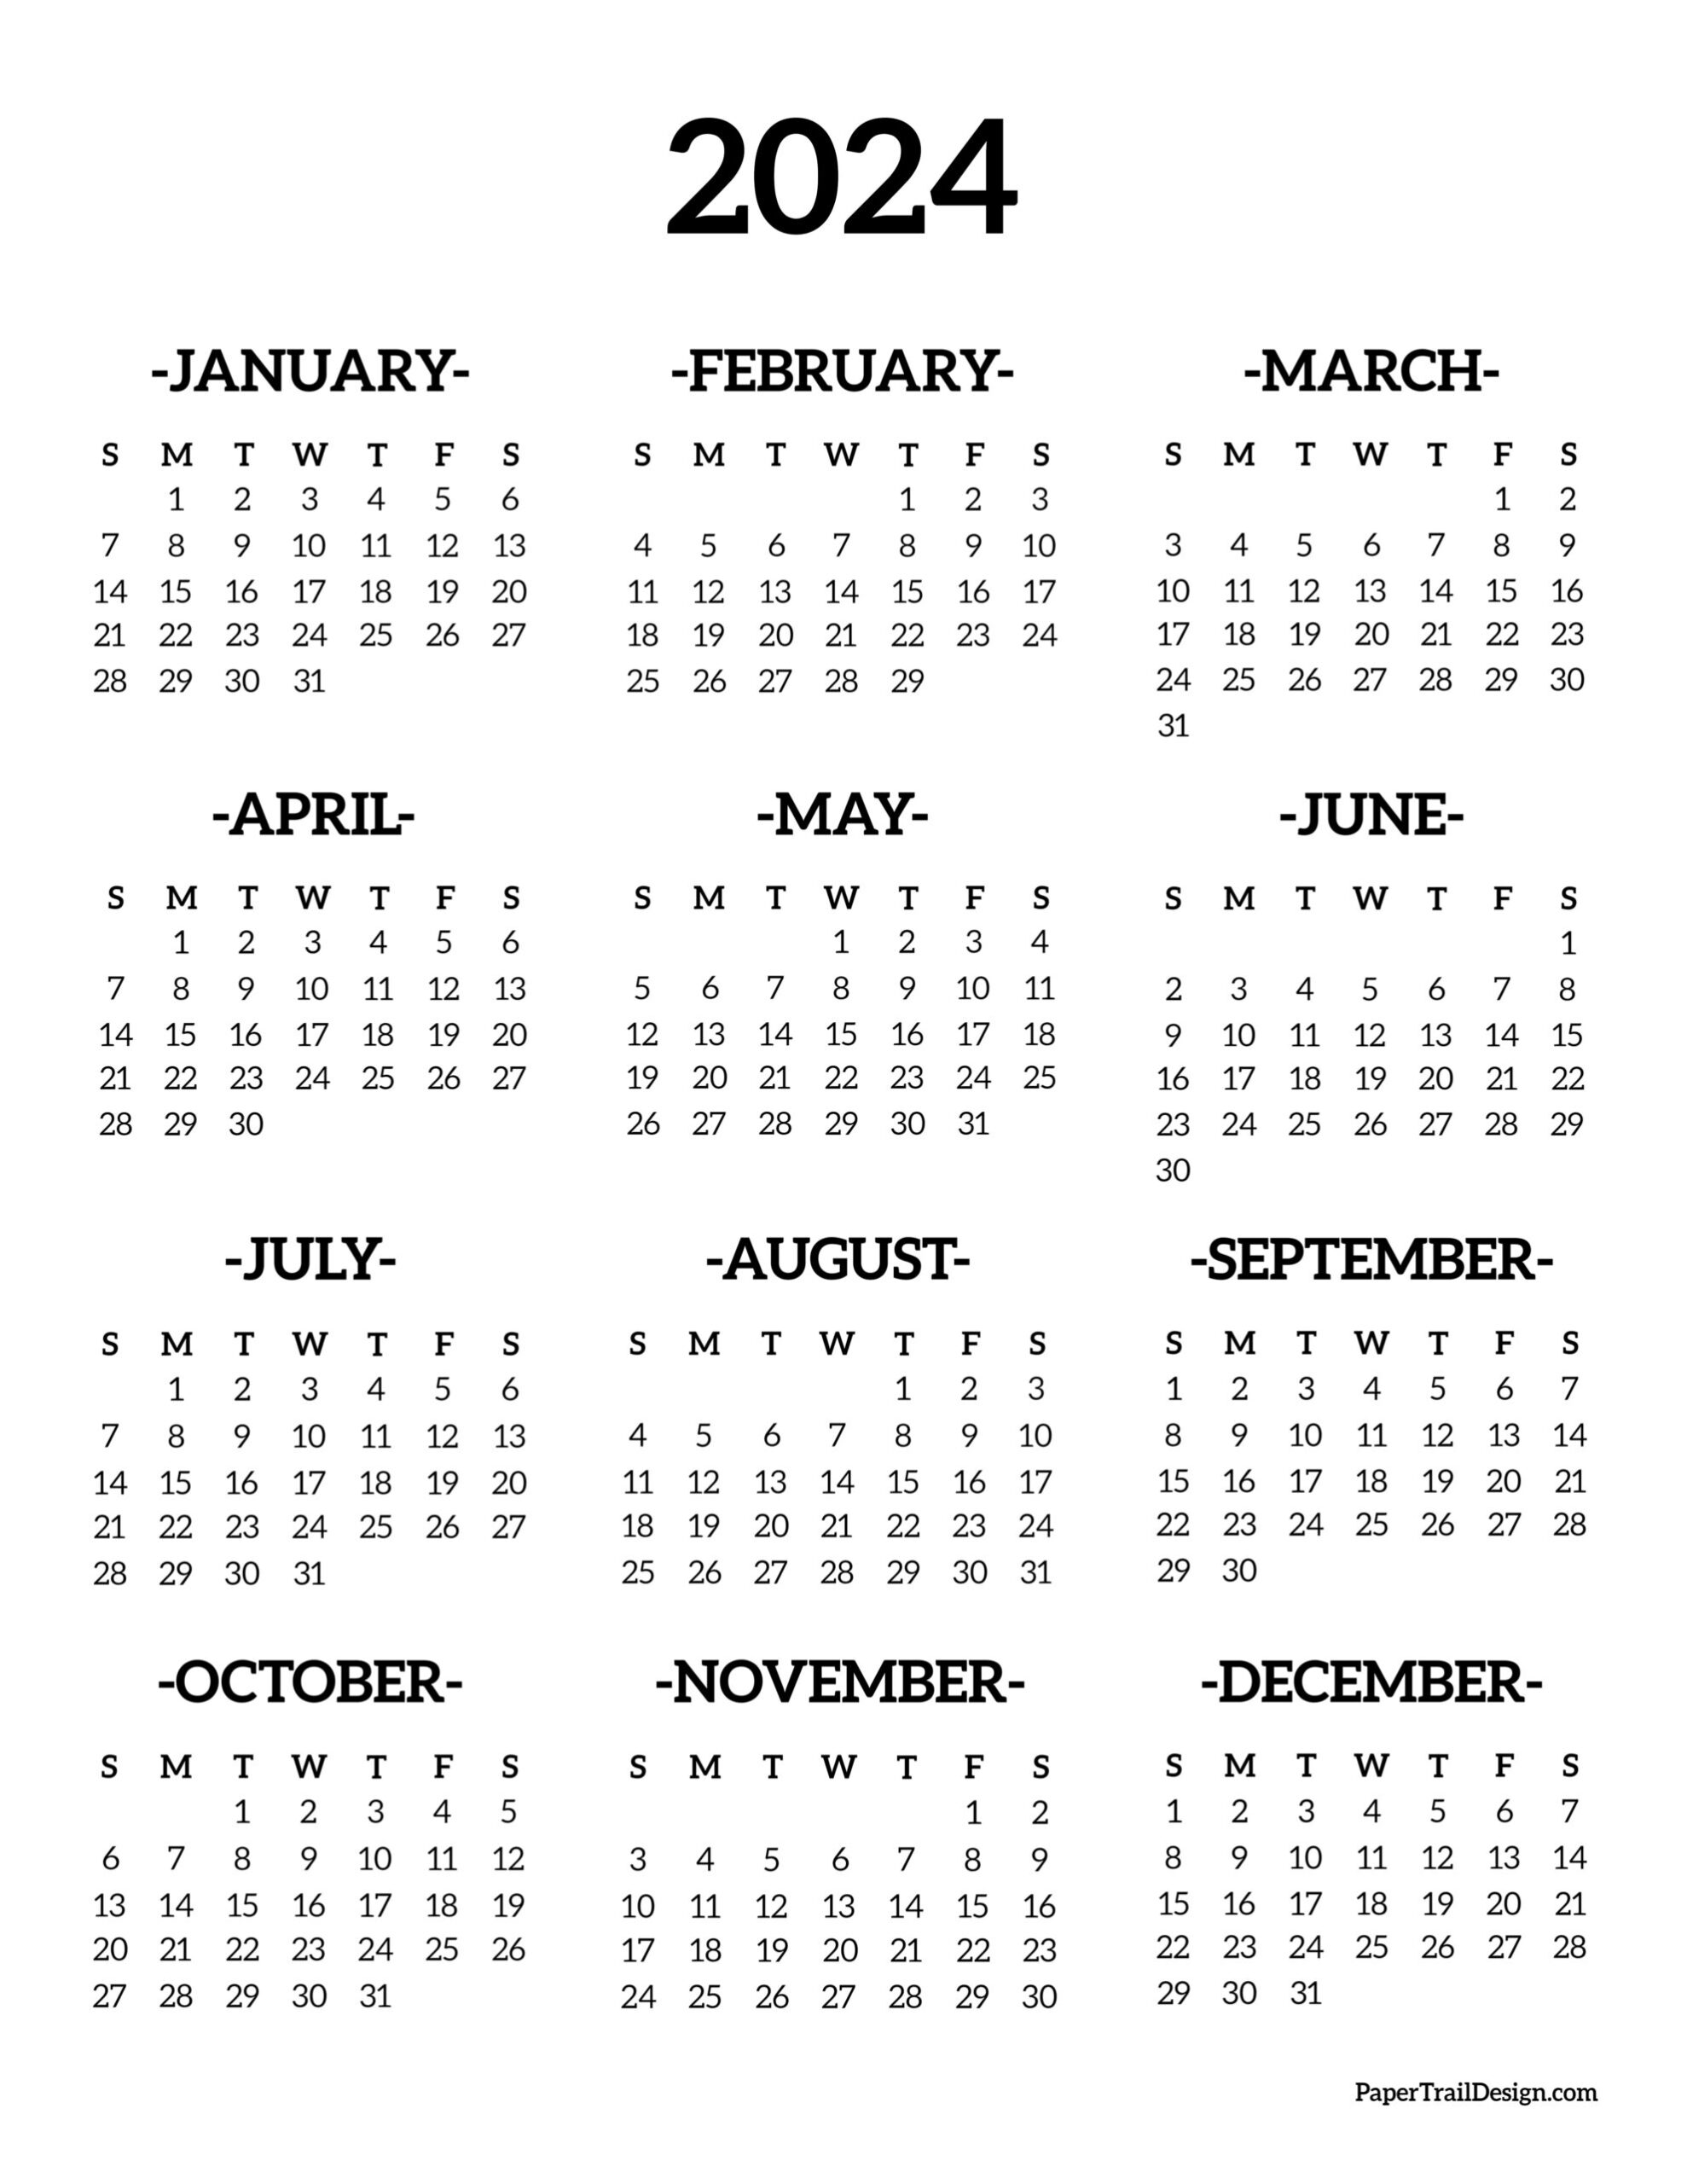 Calendar 2024 Printable One Page - Paper Trail Design for Printable 2024 And 2024 Calendar